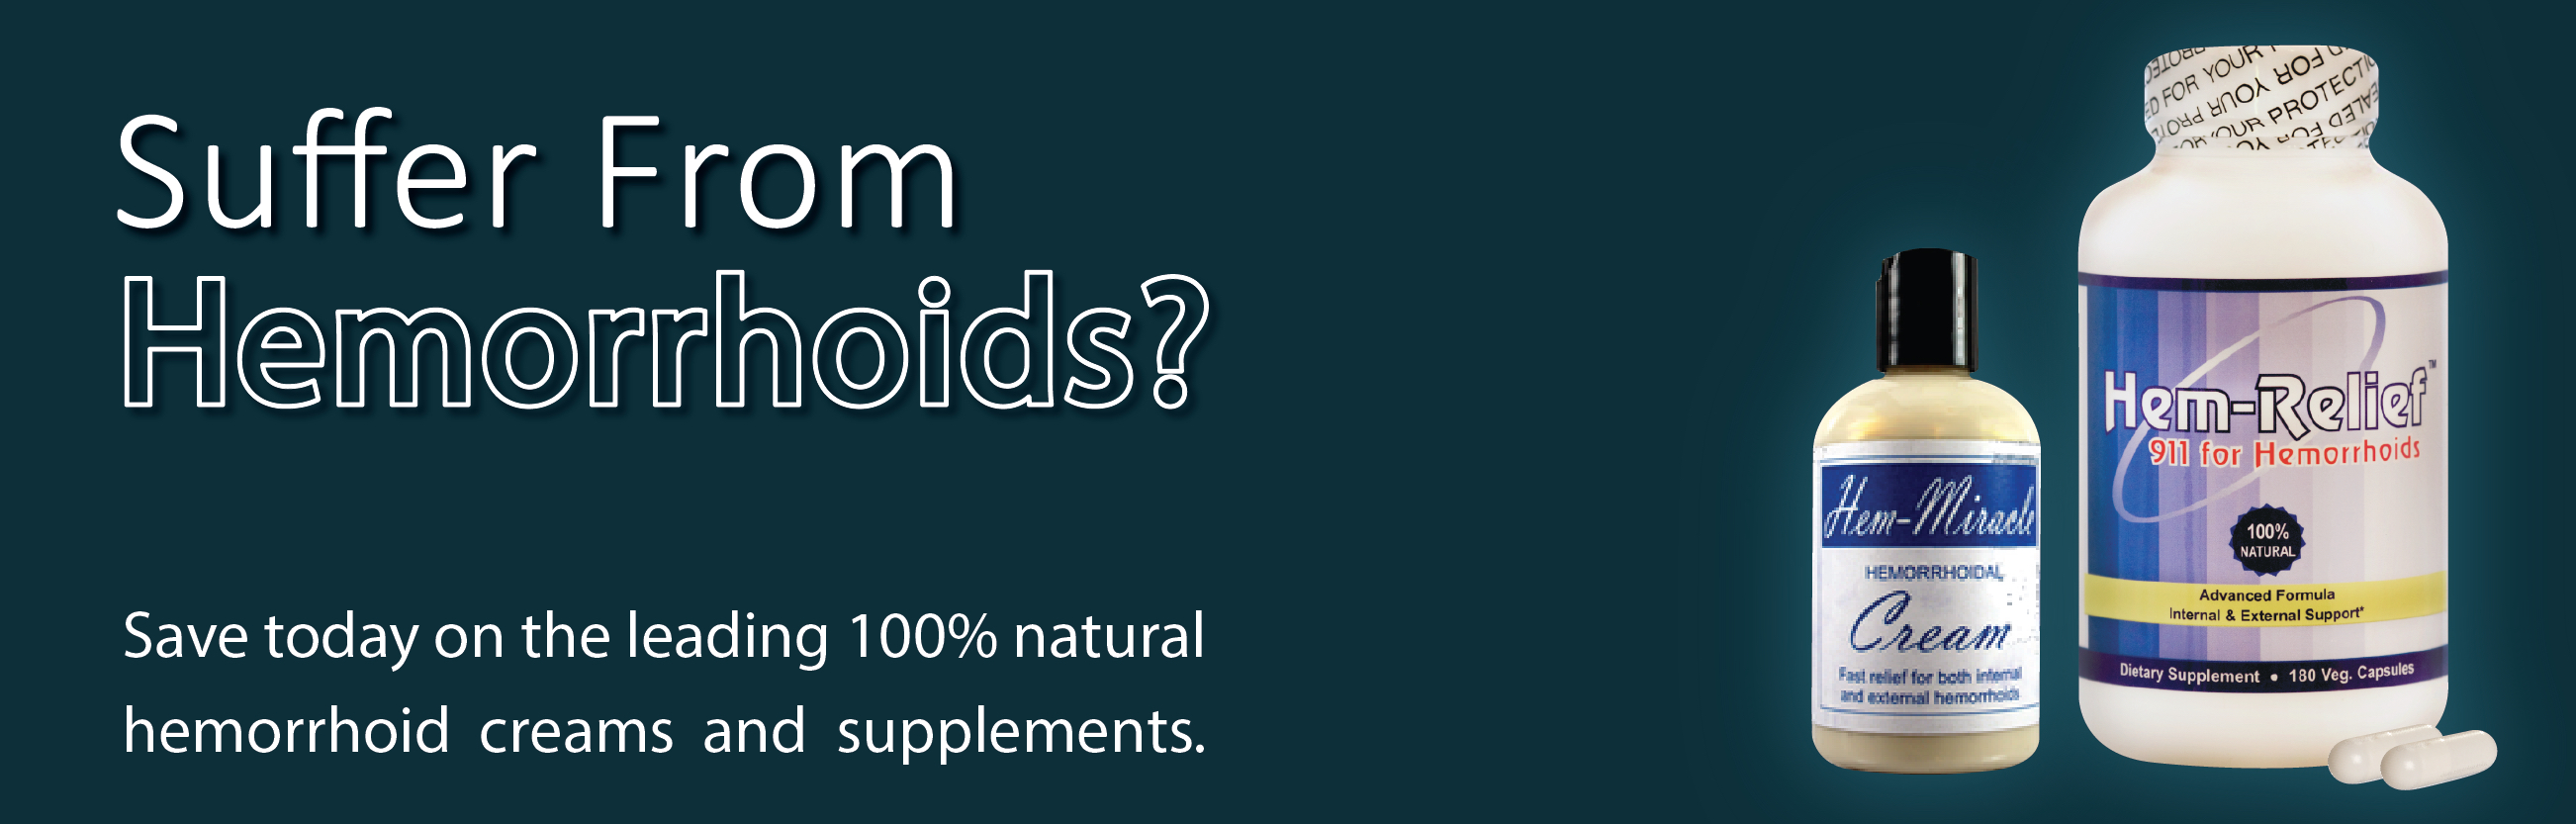 100% natural hemorrhoid creams and supplements